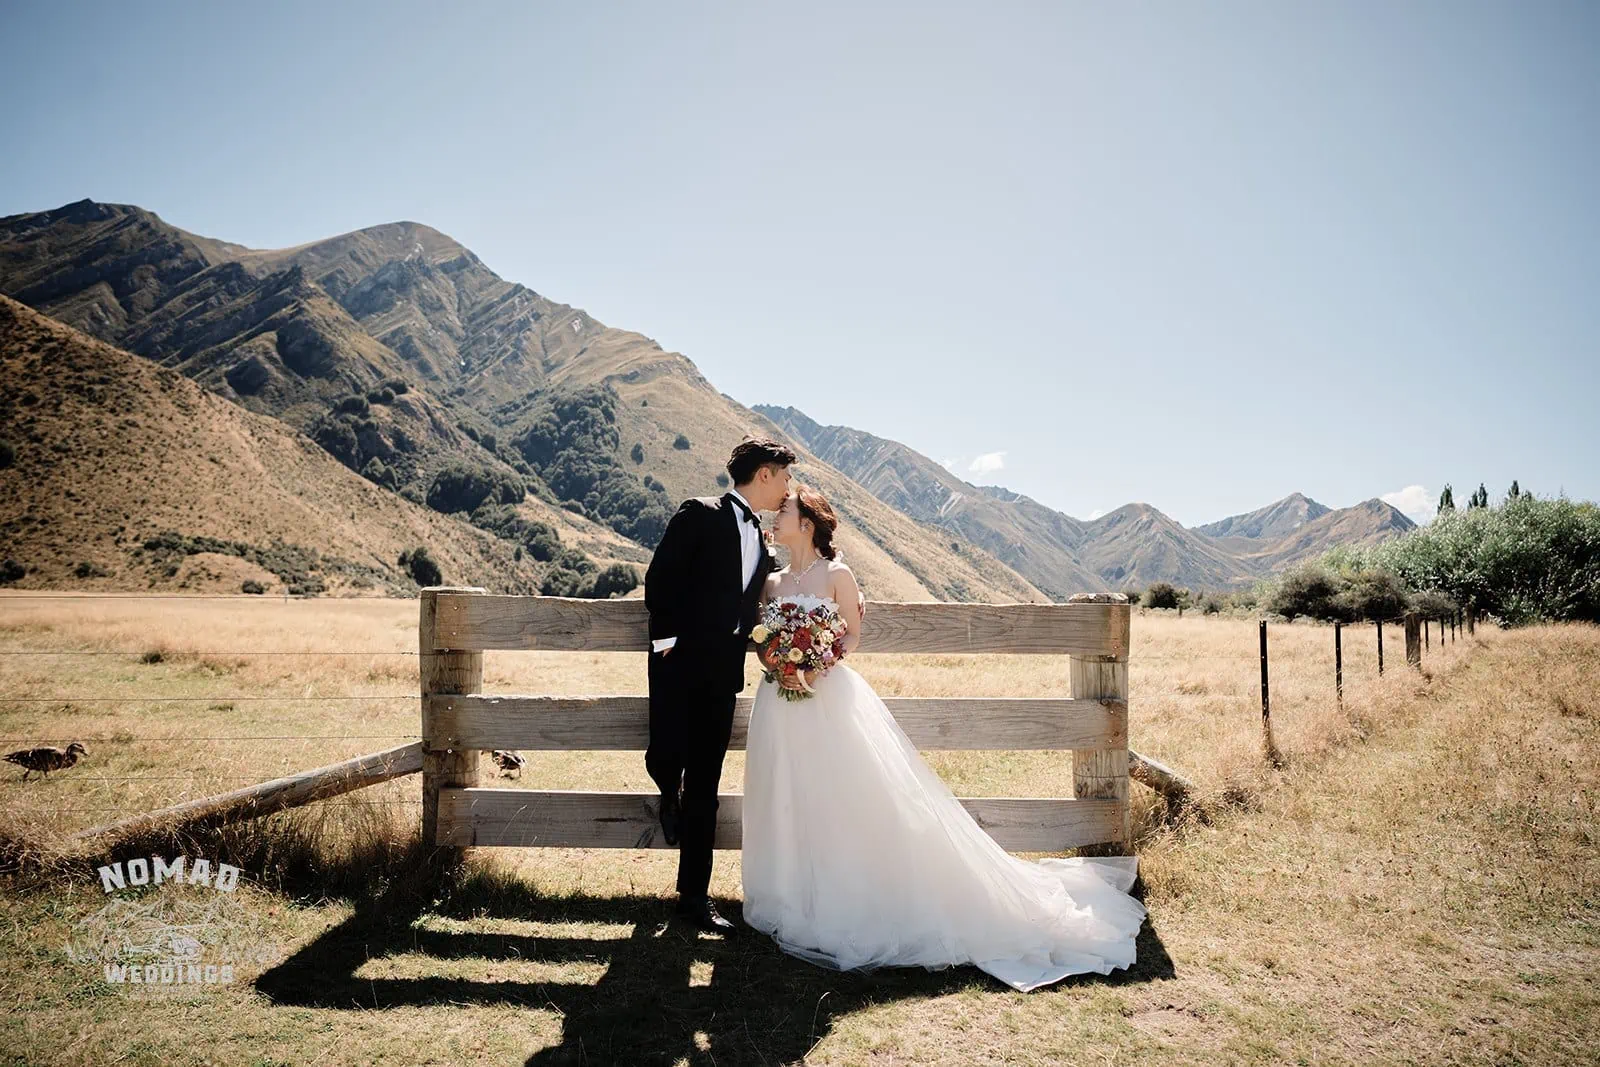 Queenstown New Zealand Elopement Wedding Photographer - A bride and groom kissing on a wooden fence in the mountains during summer.